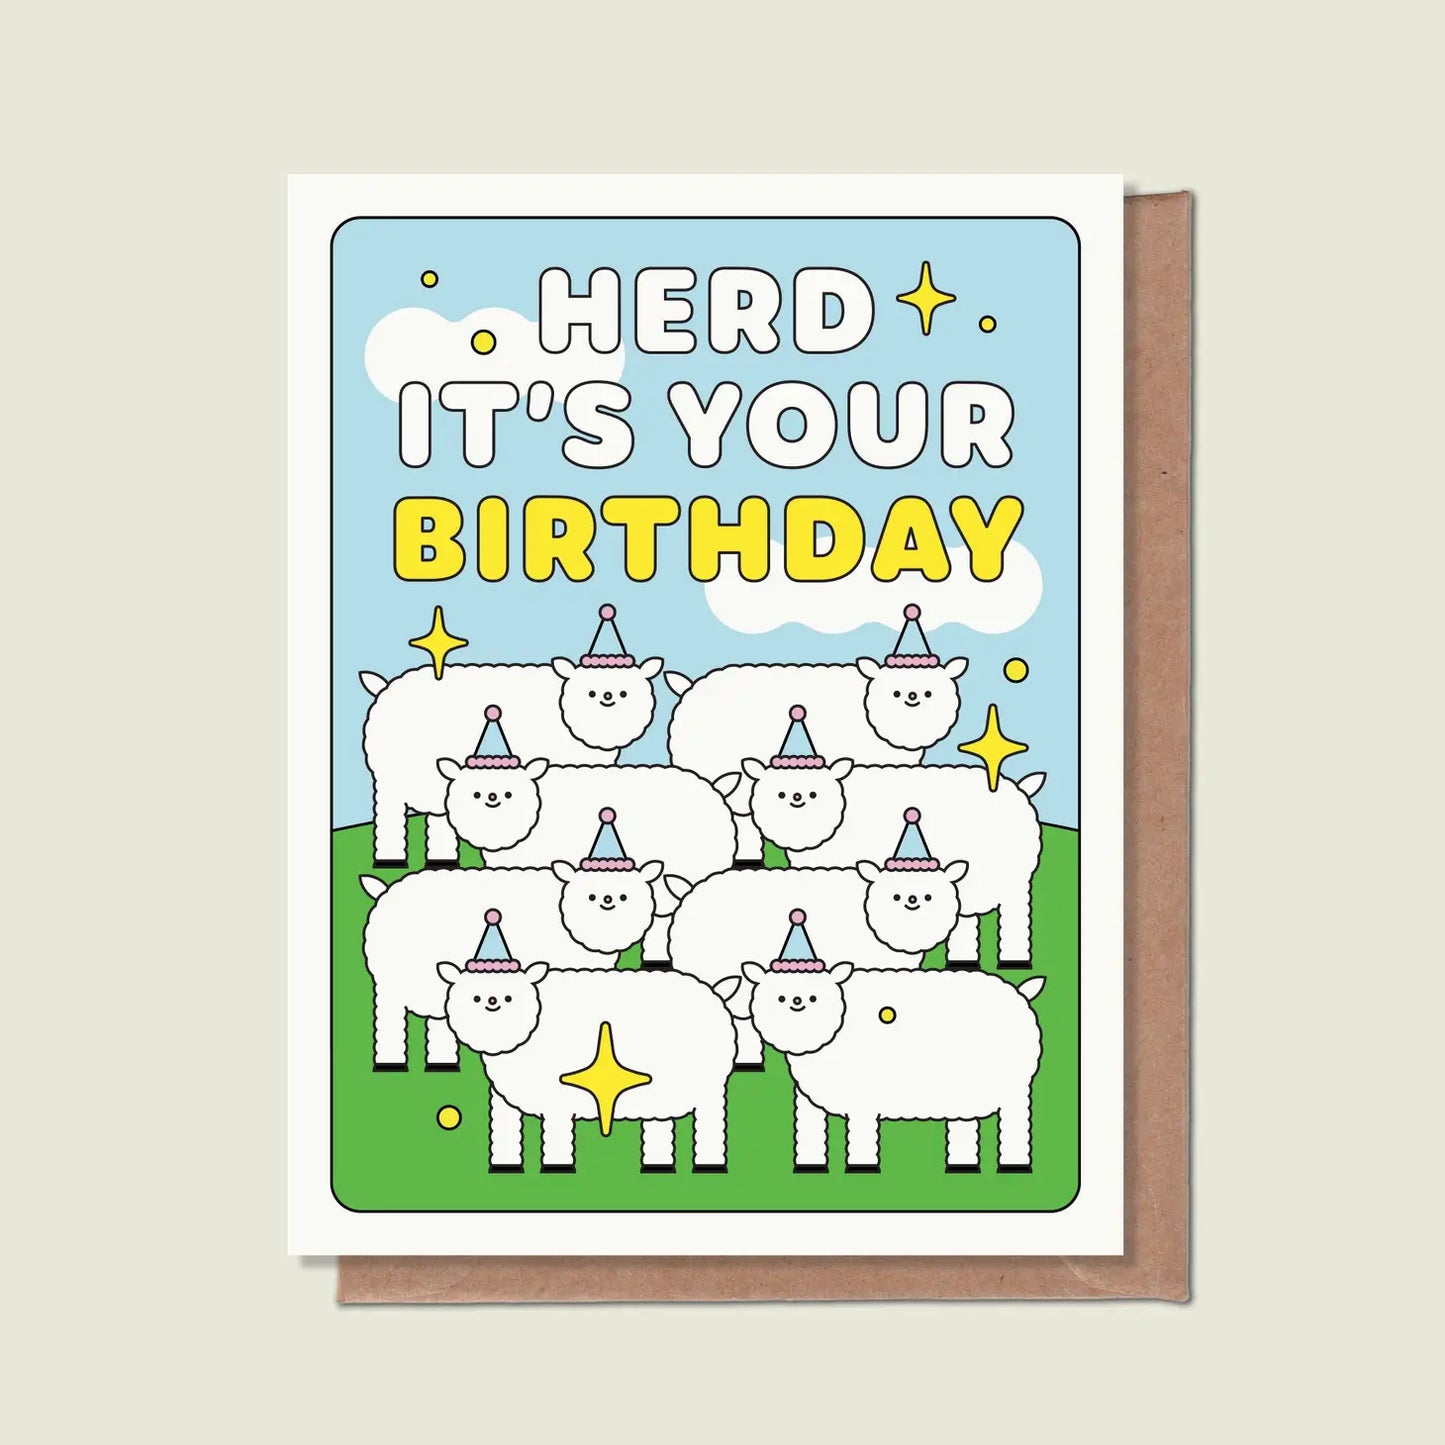 Herd It's Your Birthday Greeting Card